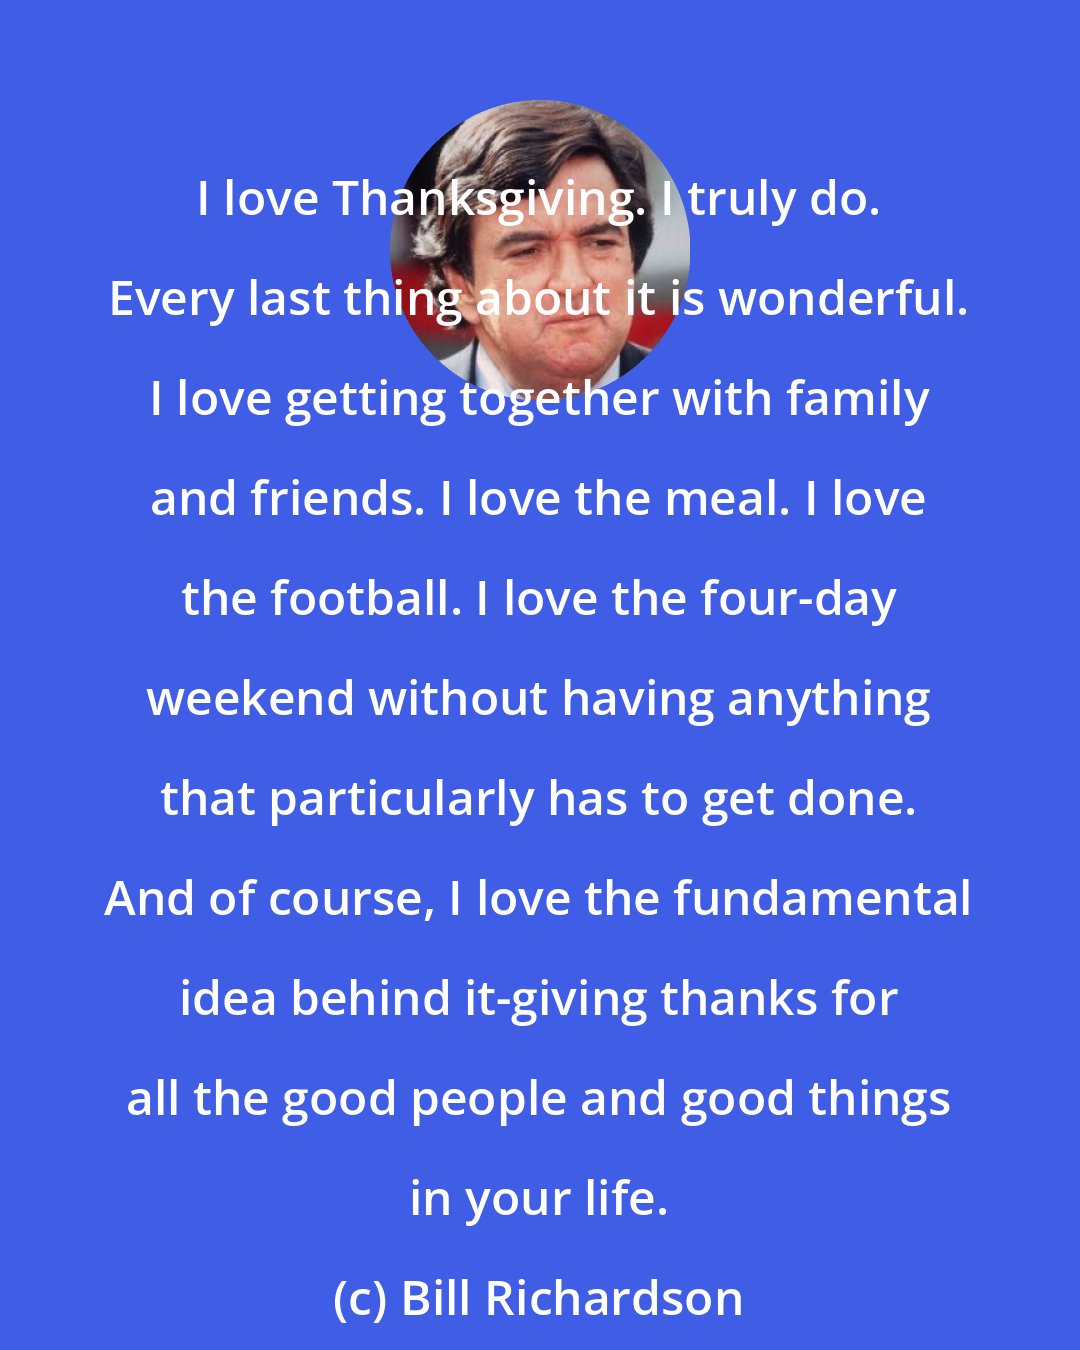 Bill Richardson: I love Thanksgiving. I truly do. Every last thing about it is wonderful. I love getting together with family and friends. I love the meal. I love the football. I love the four-day weekend without having anything that particularly has to get done. And of course, I love the fundamental idea behind it-giving thanks for all the good people and good things in your life.